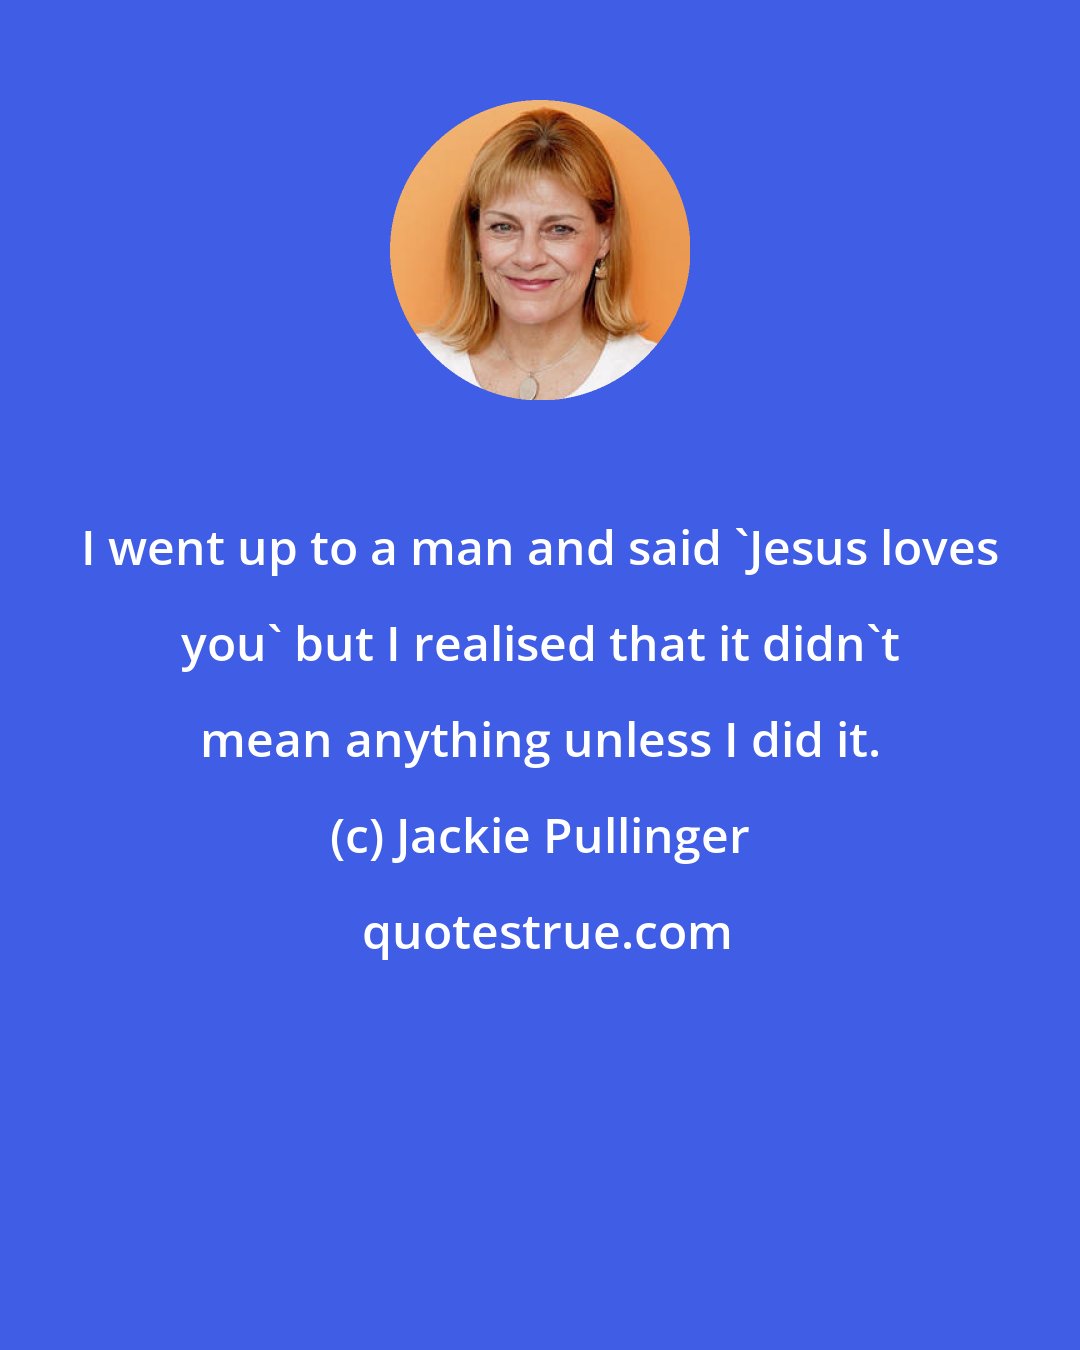 Jackie Pullinger: I went up to a man and said 'Jesus loves you' but I realised that it didn't mean anything unless I did it.